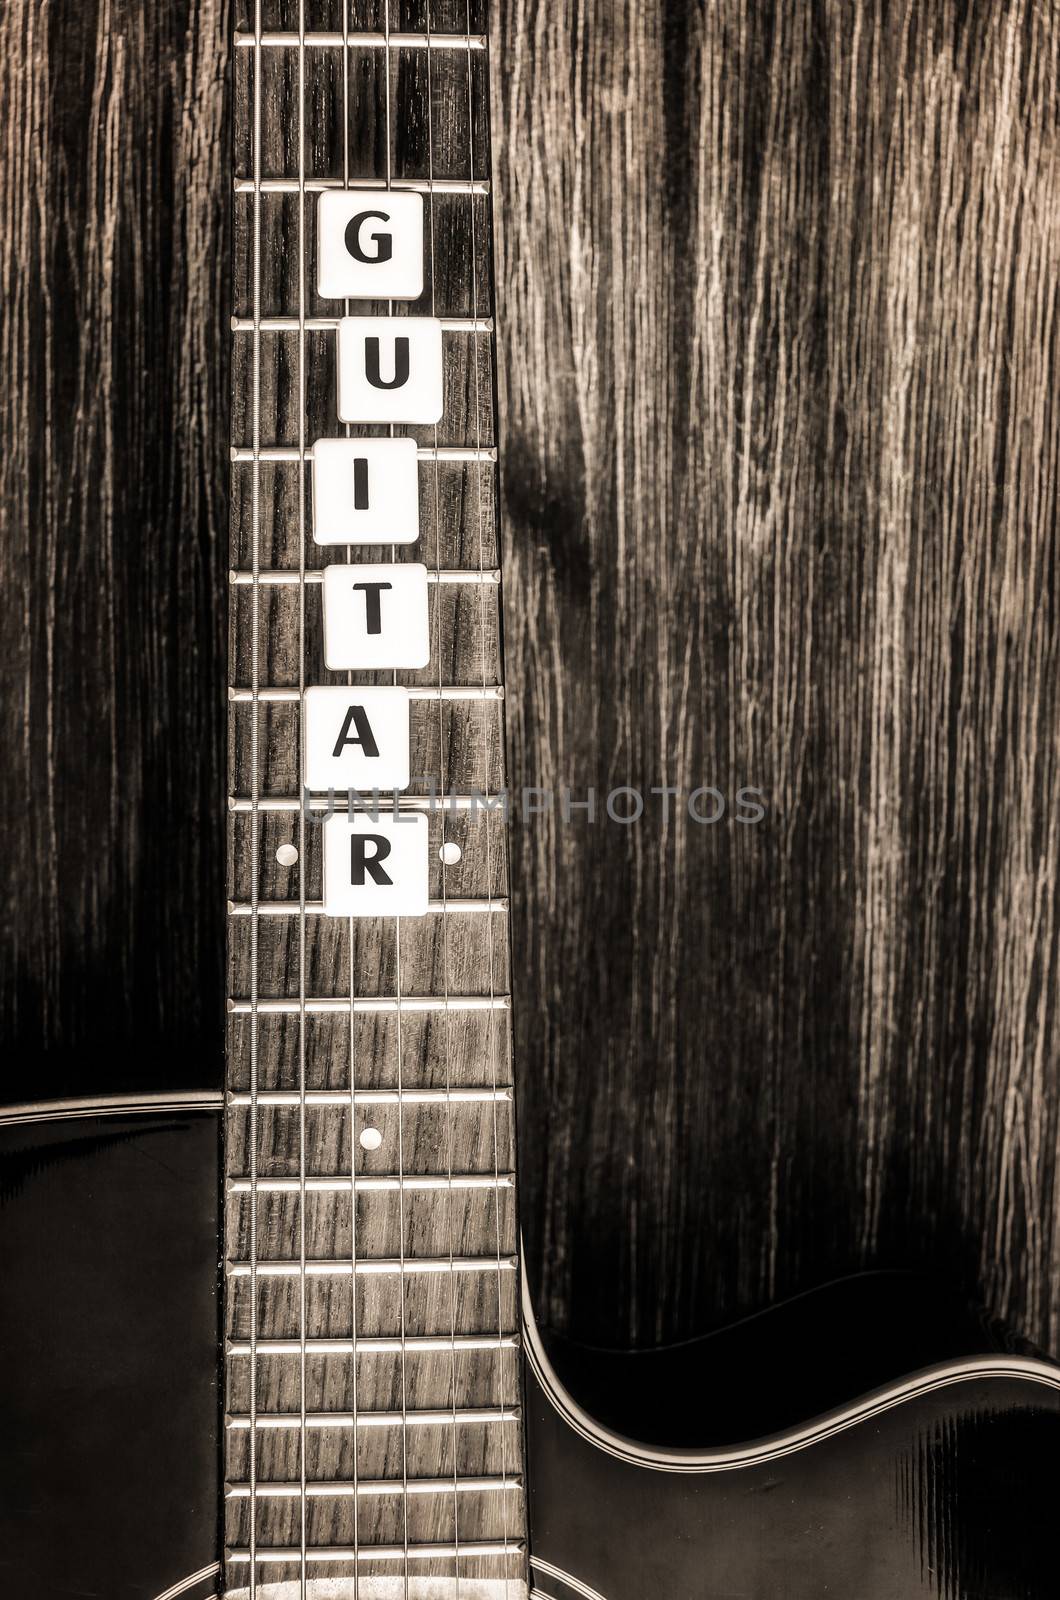 Acoustic guitar in vintage style on wood background by martinm303